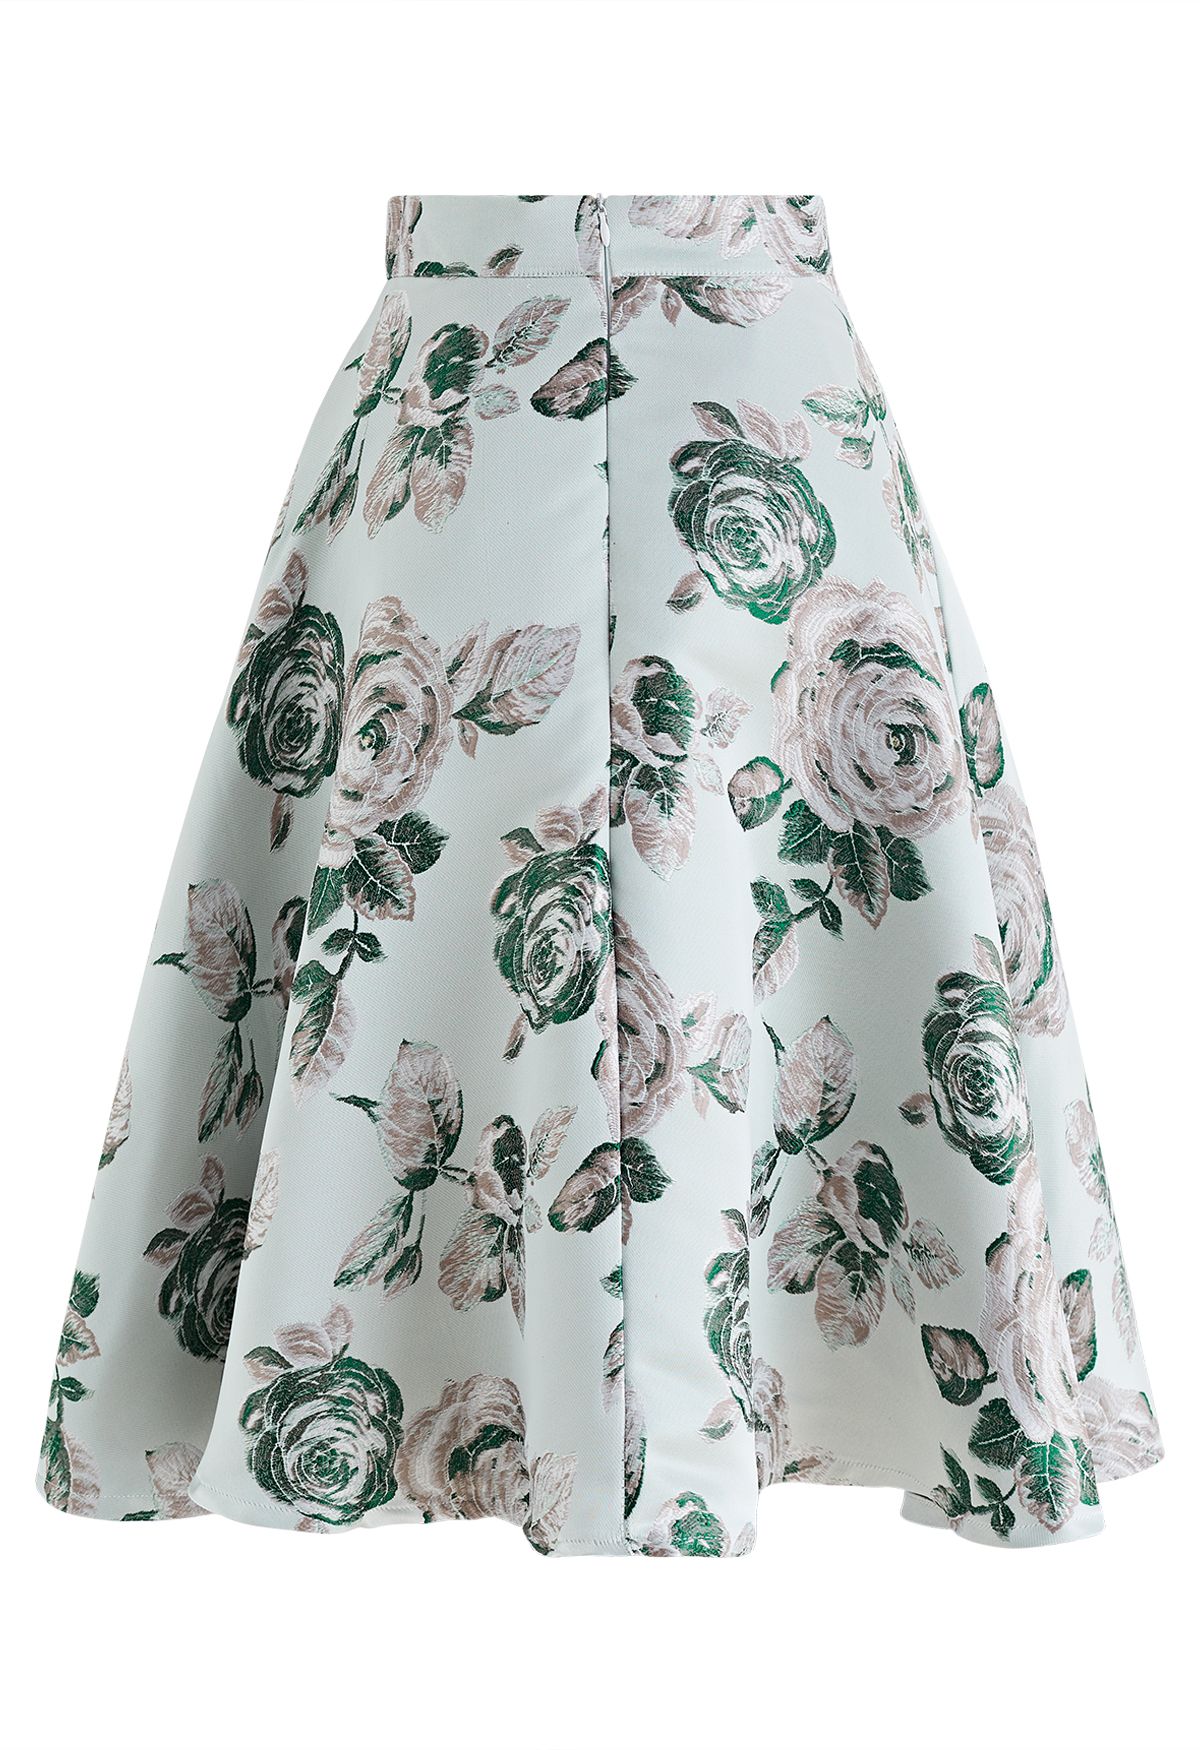 Cappuccino Rose Jacquard A-Line Skirt - Retro, Indie and Unique Fashion